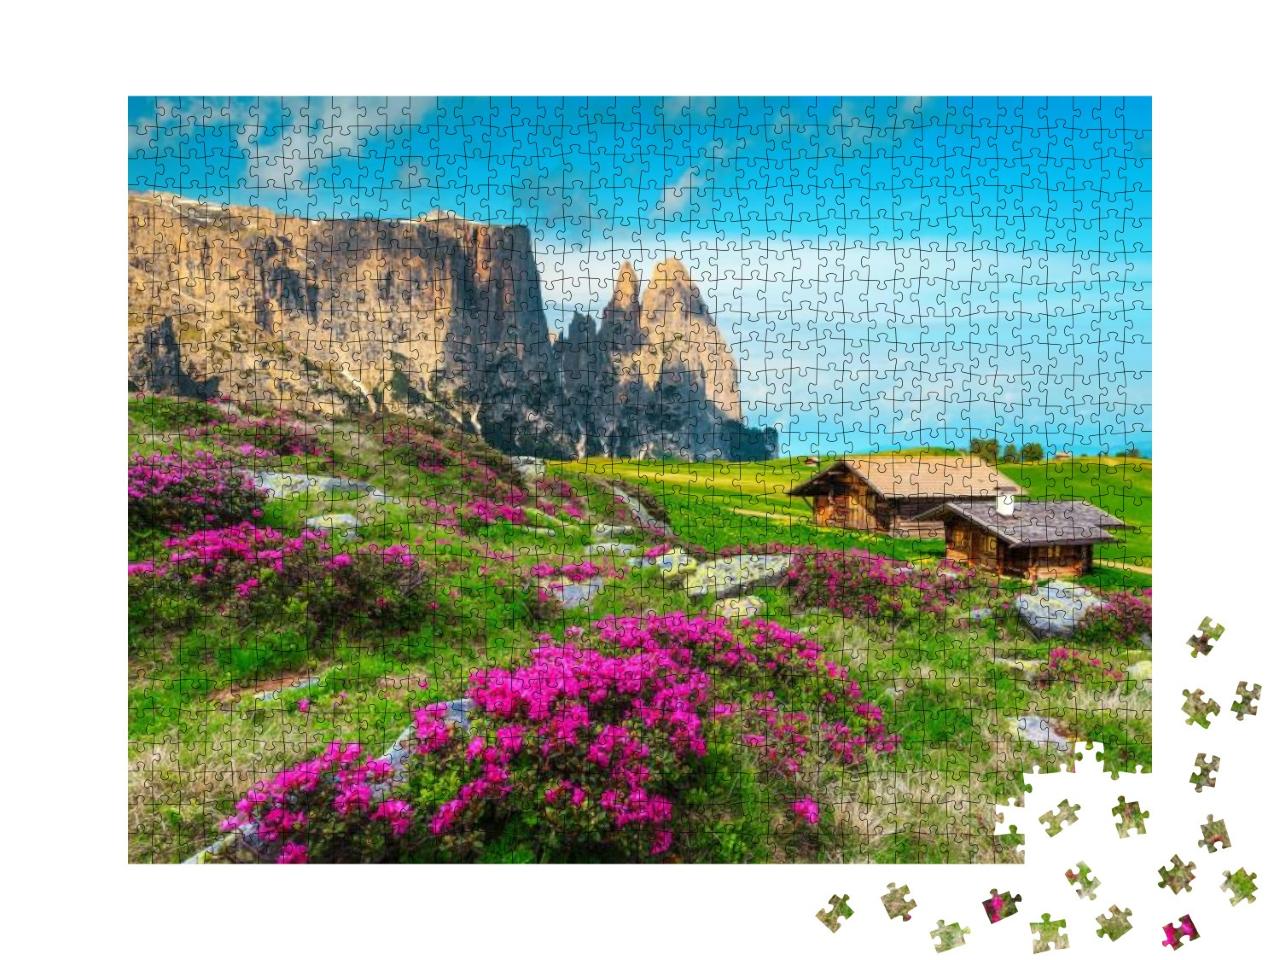 Alpe Di Siusi Mountain Resort with Amazing Flowery Fields... Jigsaw Puzzle with 1000 pieces